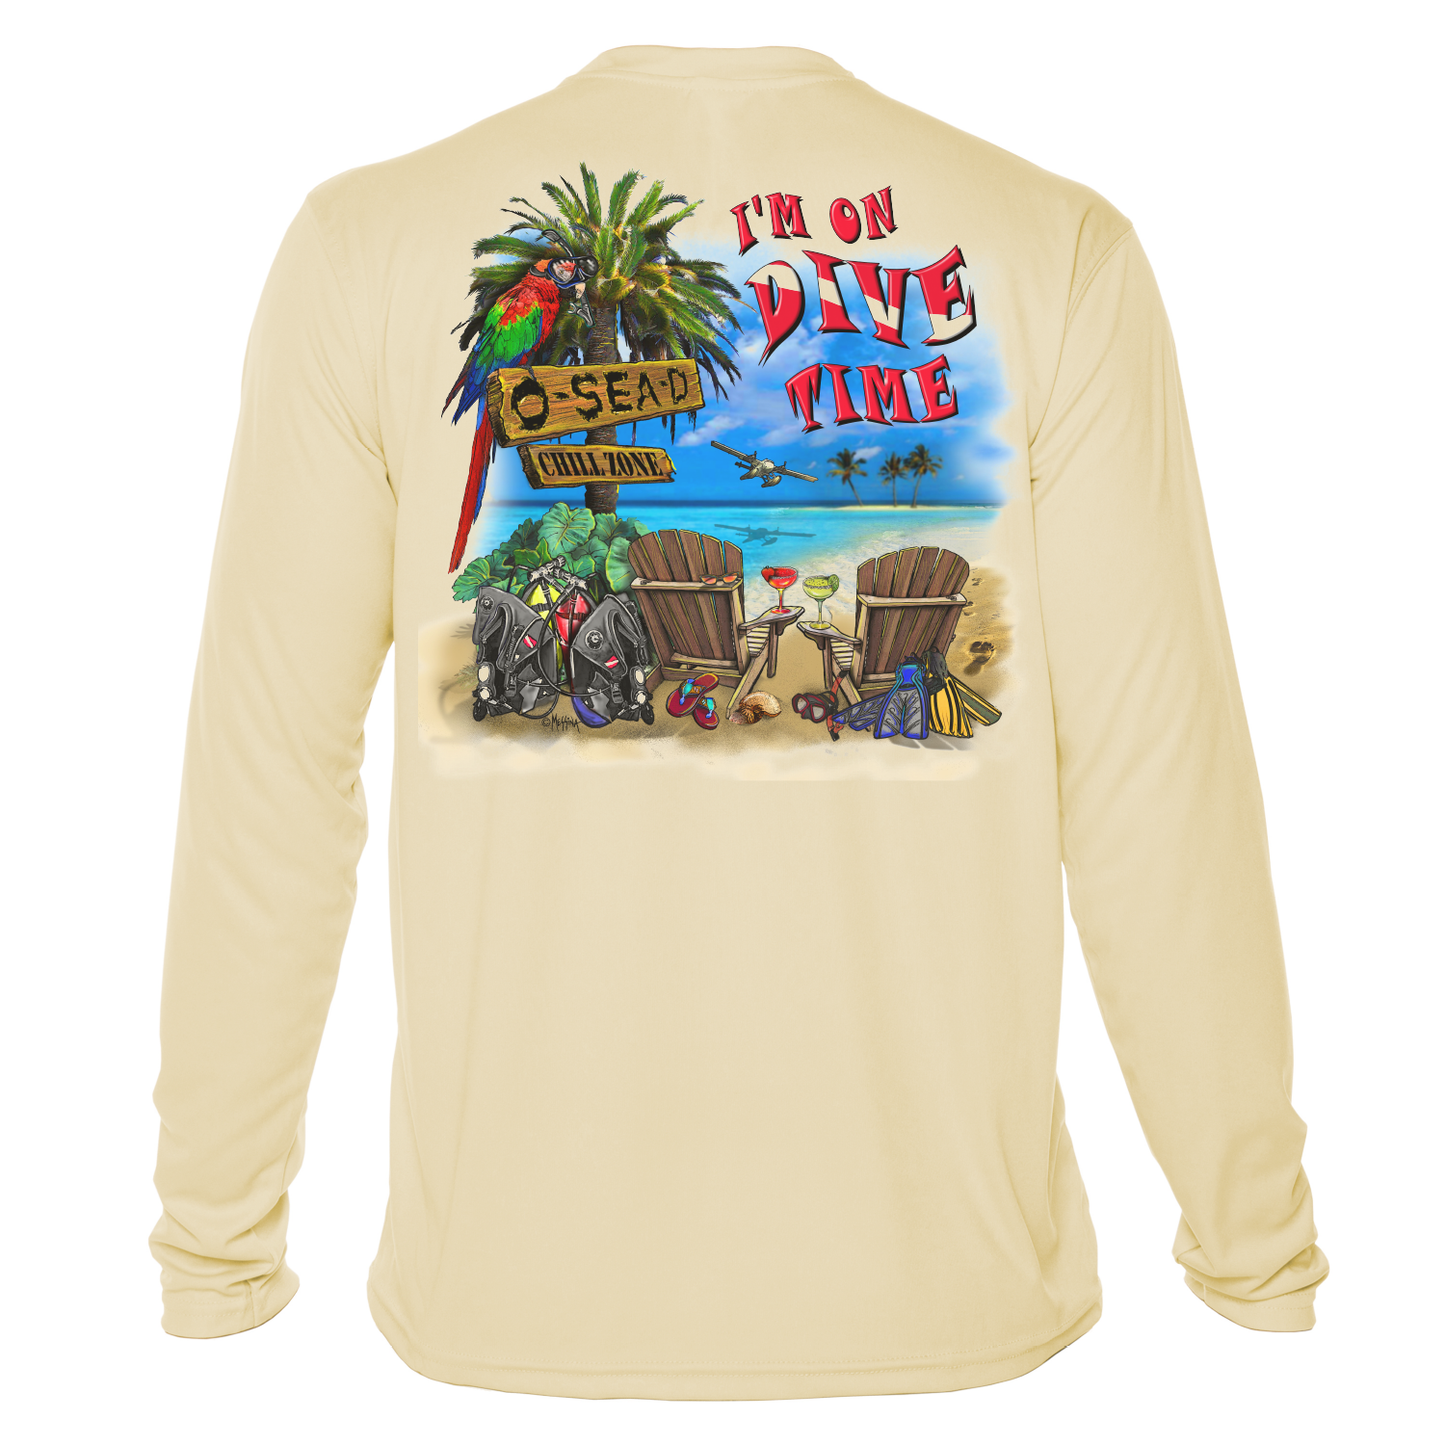 Dive Time - Long Sleeve